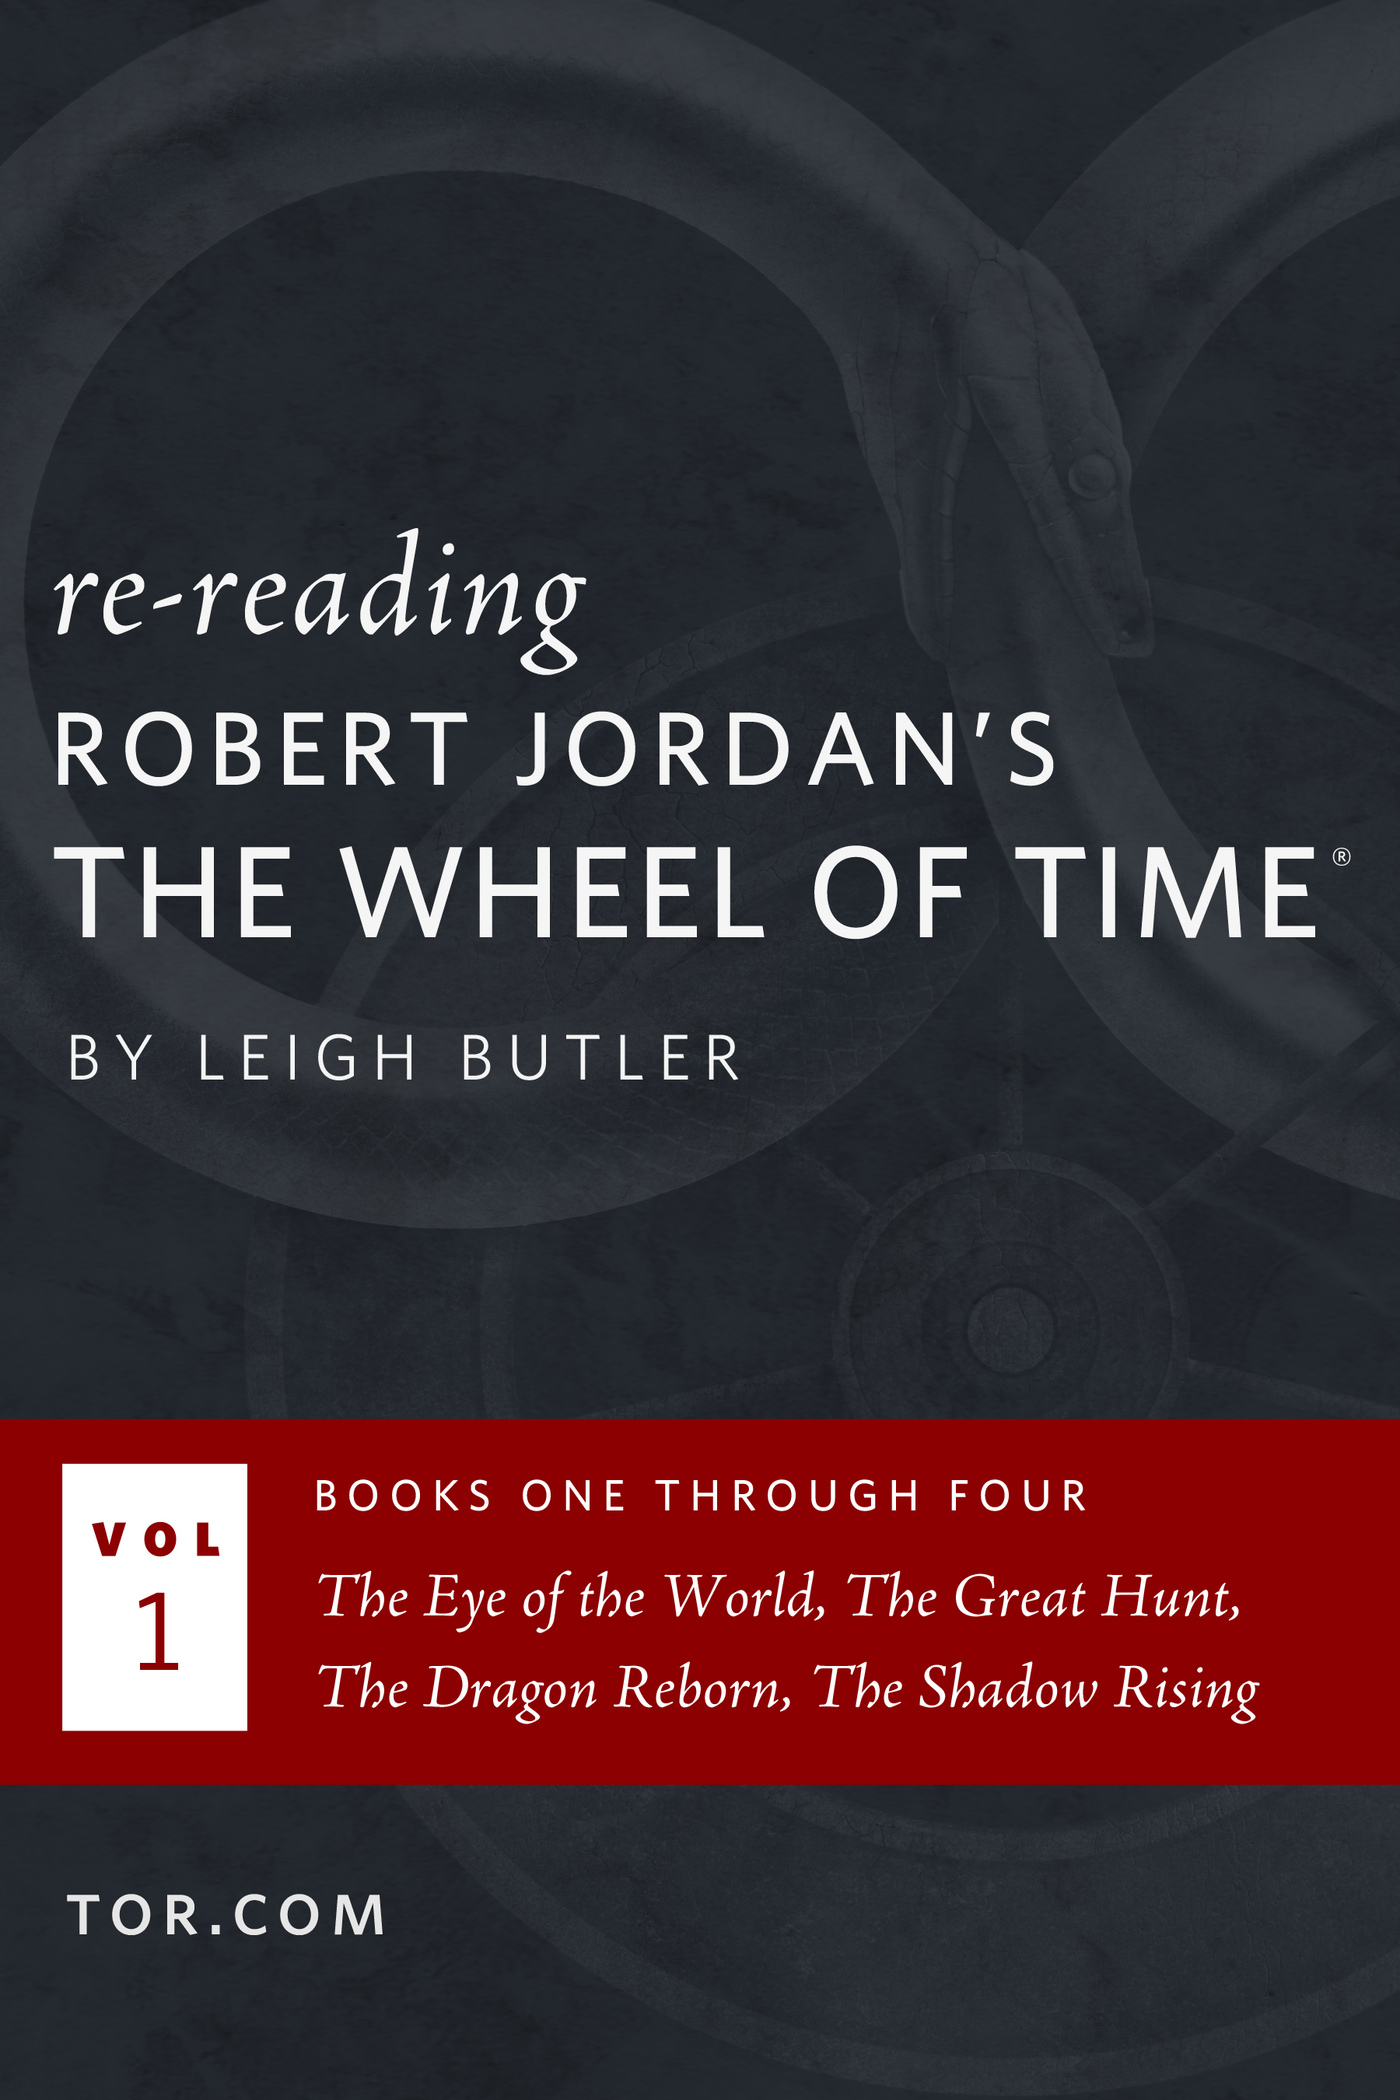 Wheel of Time Reread: Books 1-4 by Leigh Butler